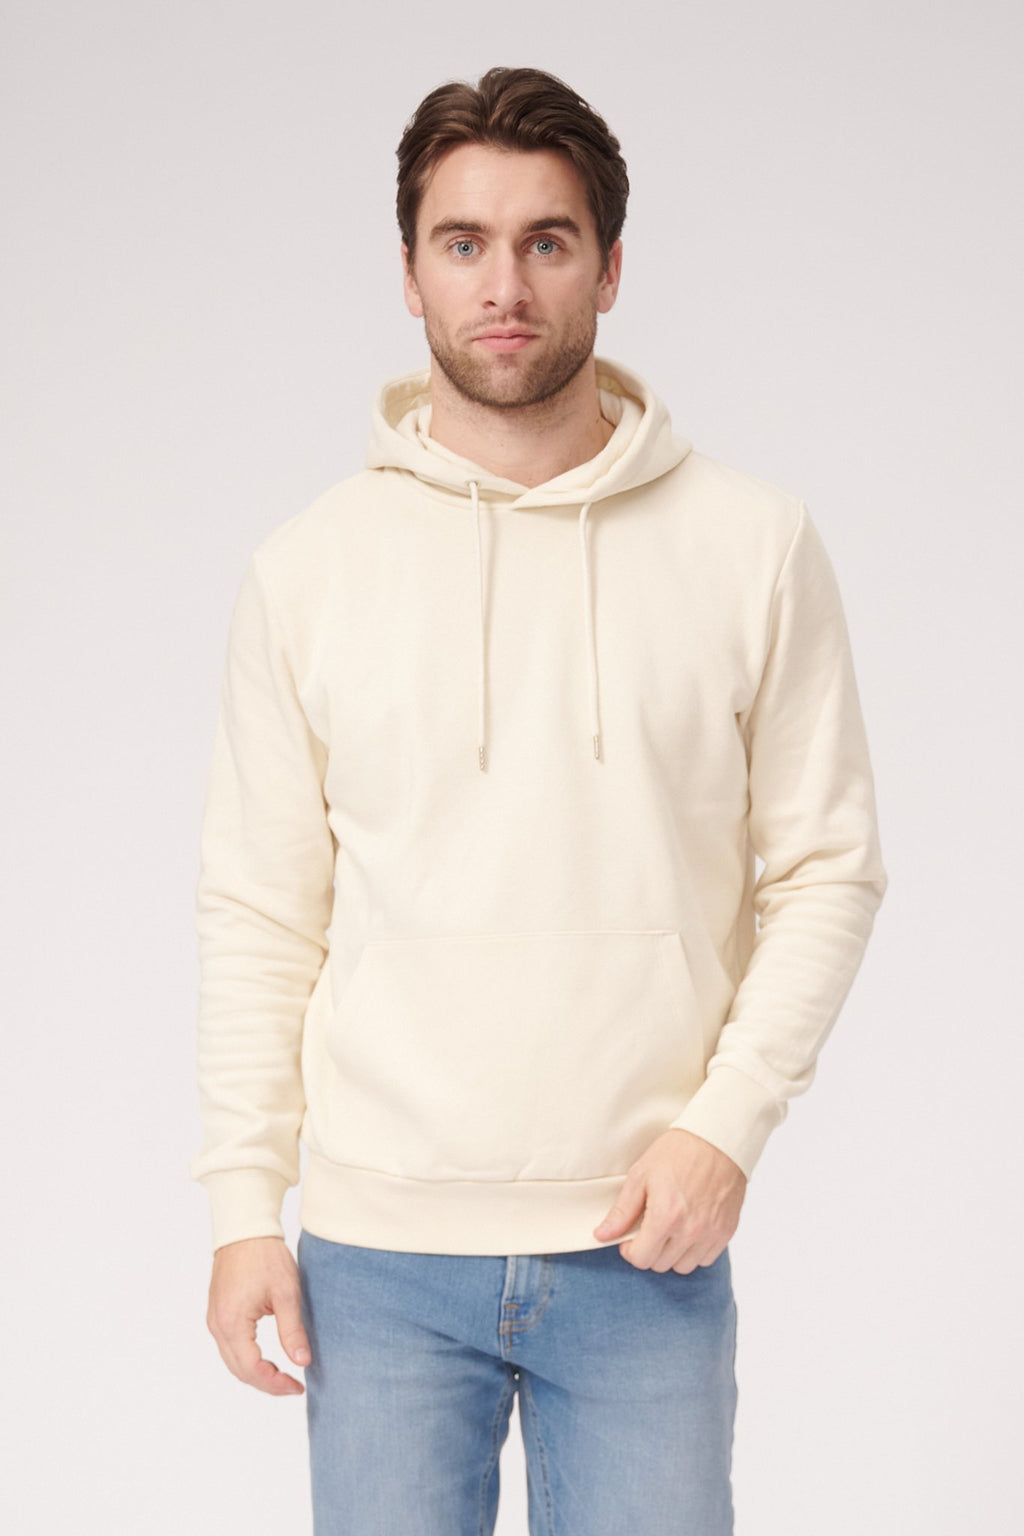 Basic Sweatsuit with Hoodie (Light Beige) - Package Deal